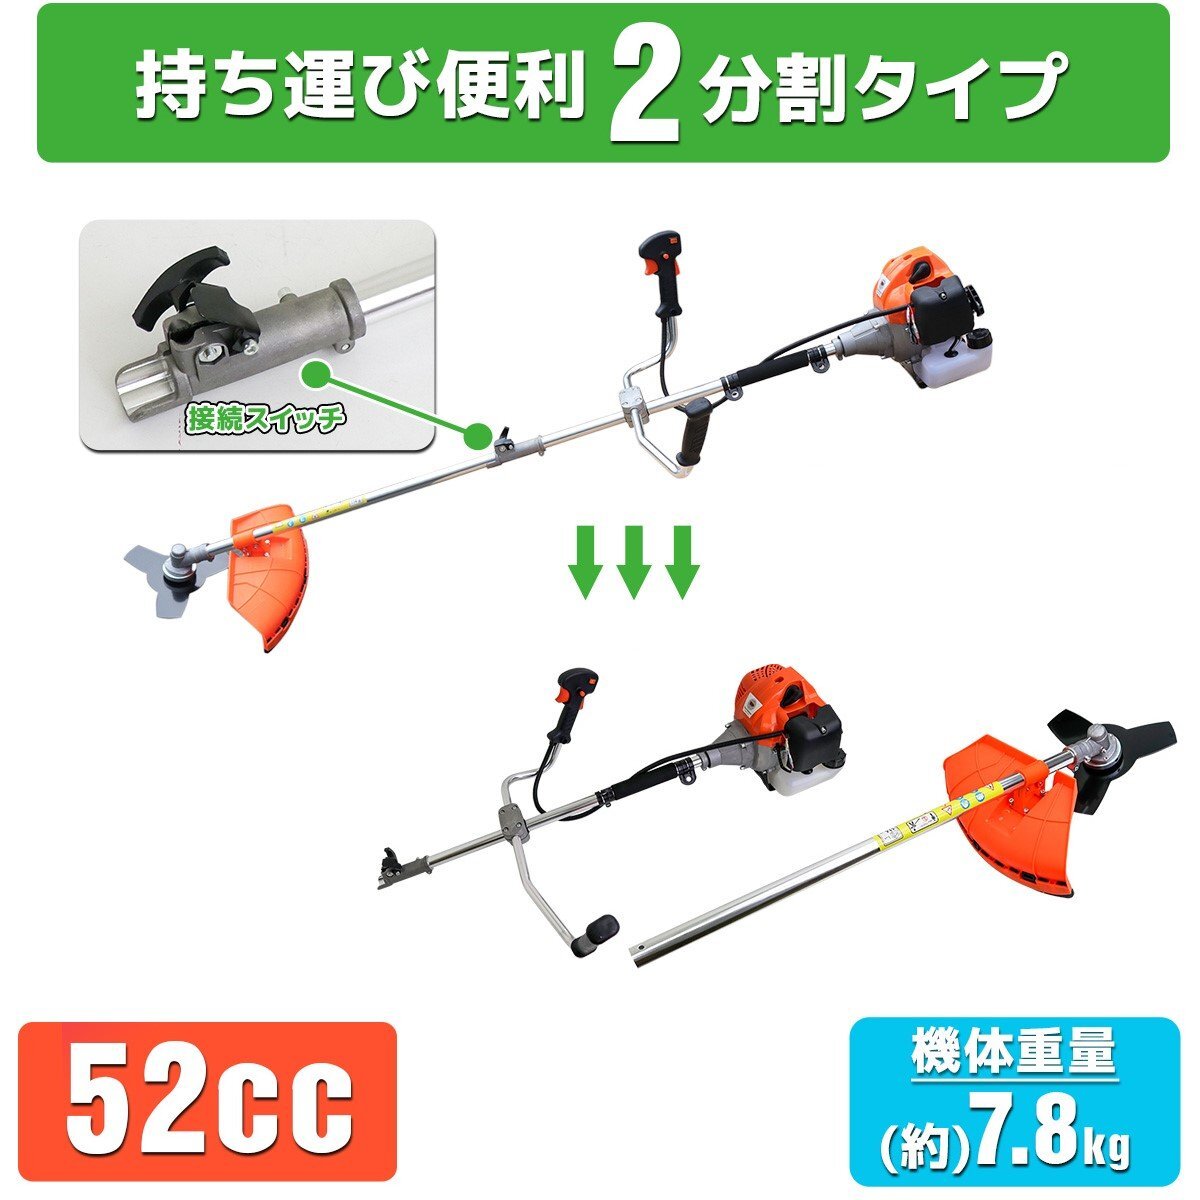 * new goods! grass mower classical 52CC engine installing!2 division type mower high power operation eminent shoulder .. brush cutter protection glasses attaching *SSX